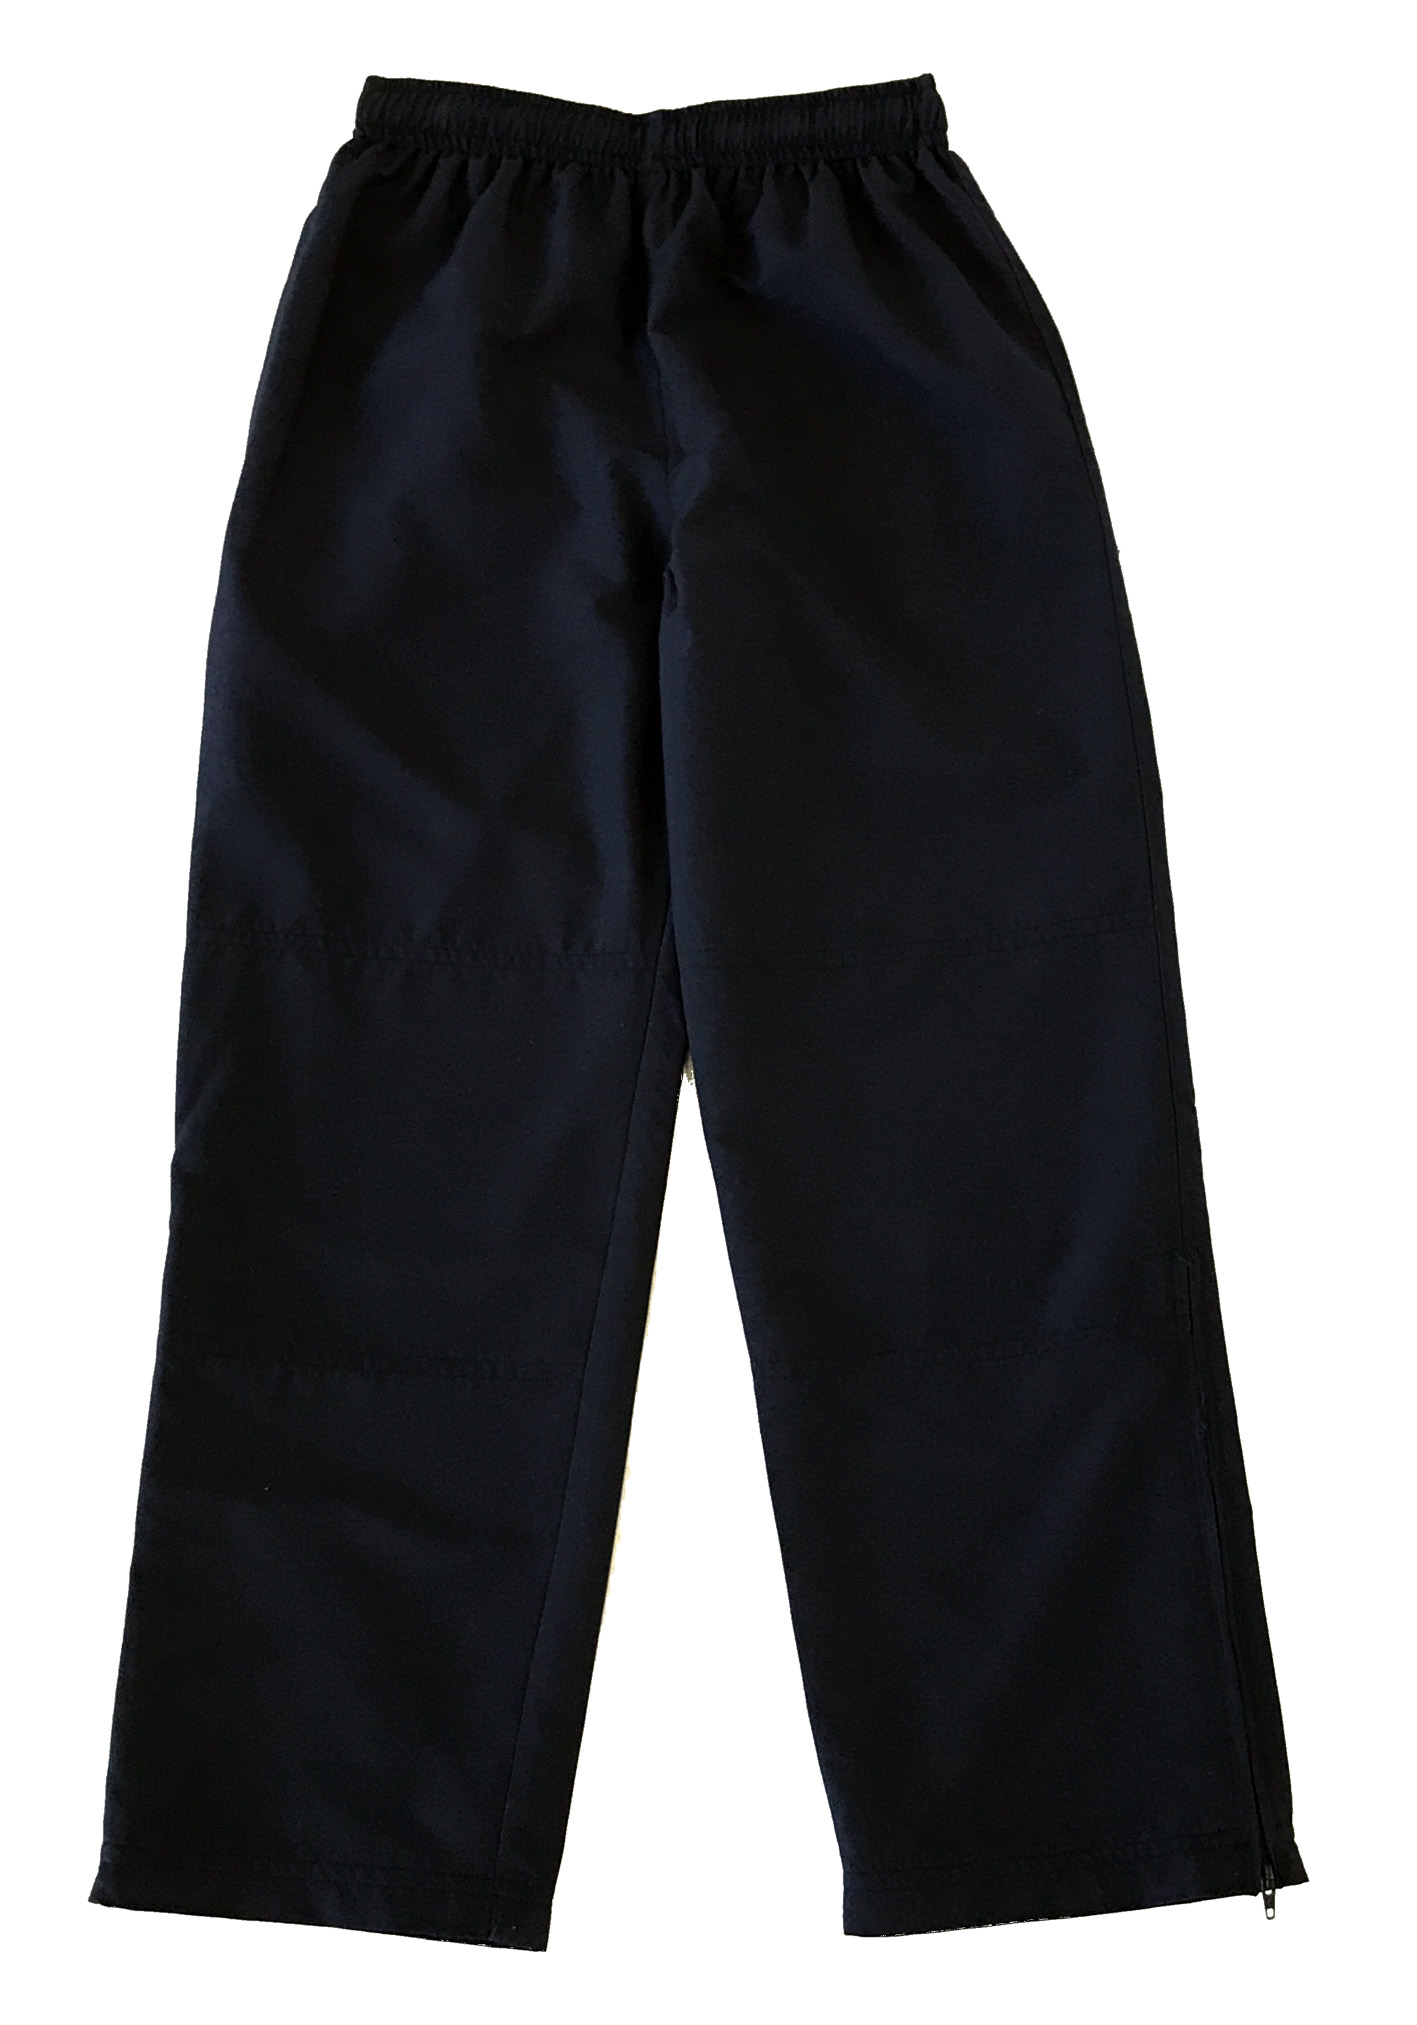 Manly Selective Girls Navy Microfibre Track Pants | Shop at Pickles ...